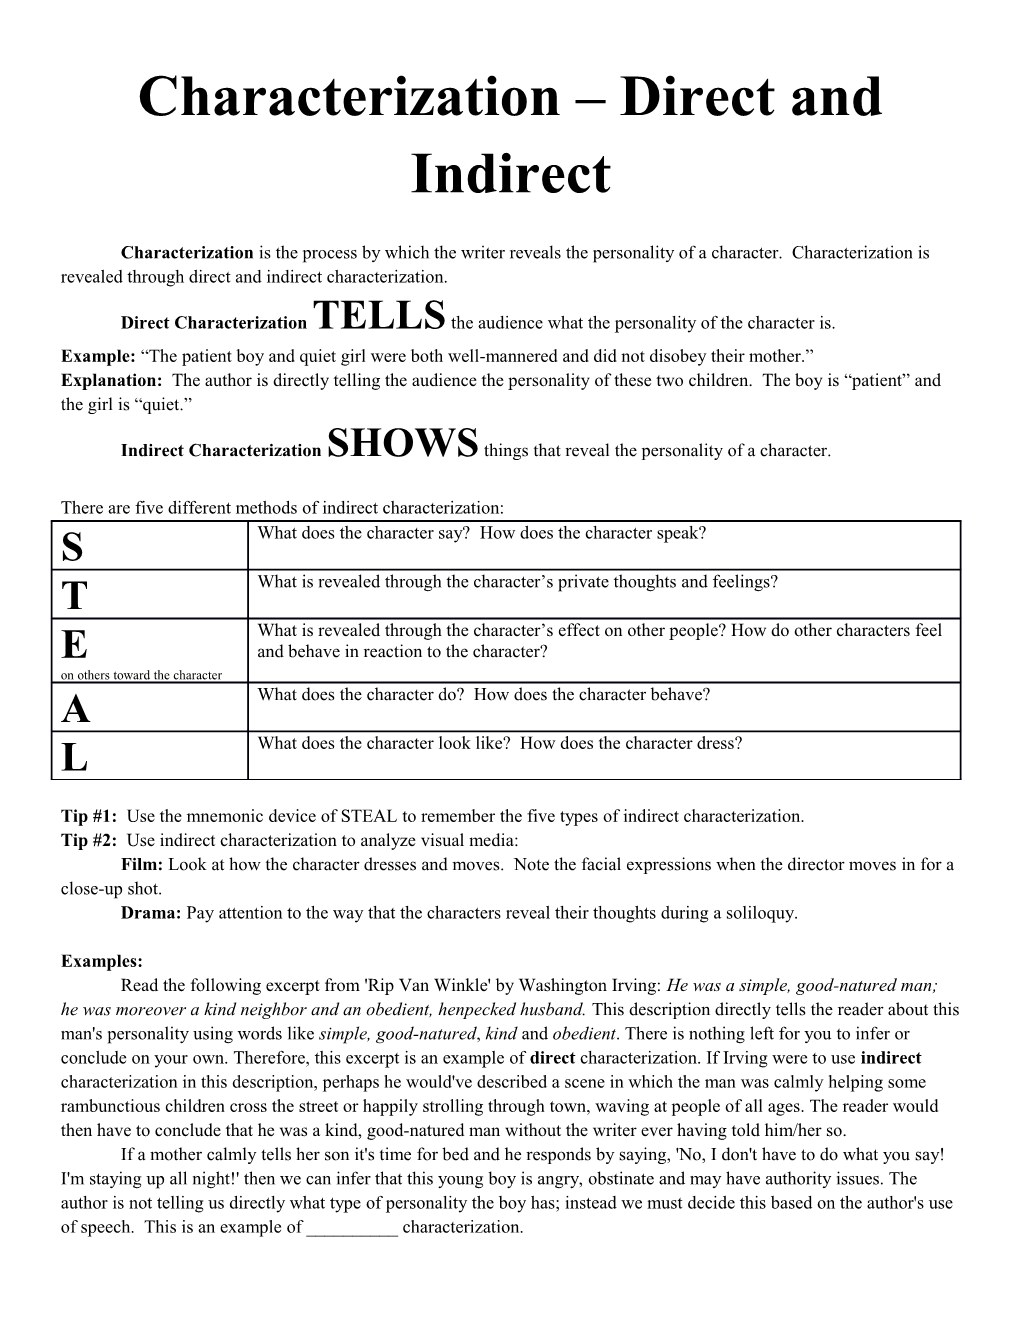 Characterization Direct and Indirect